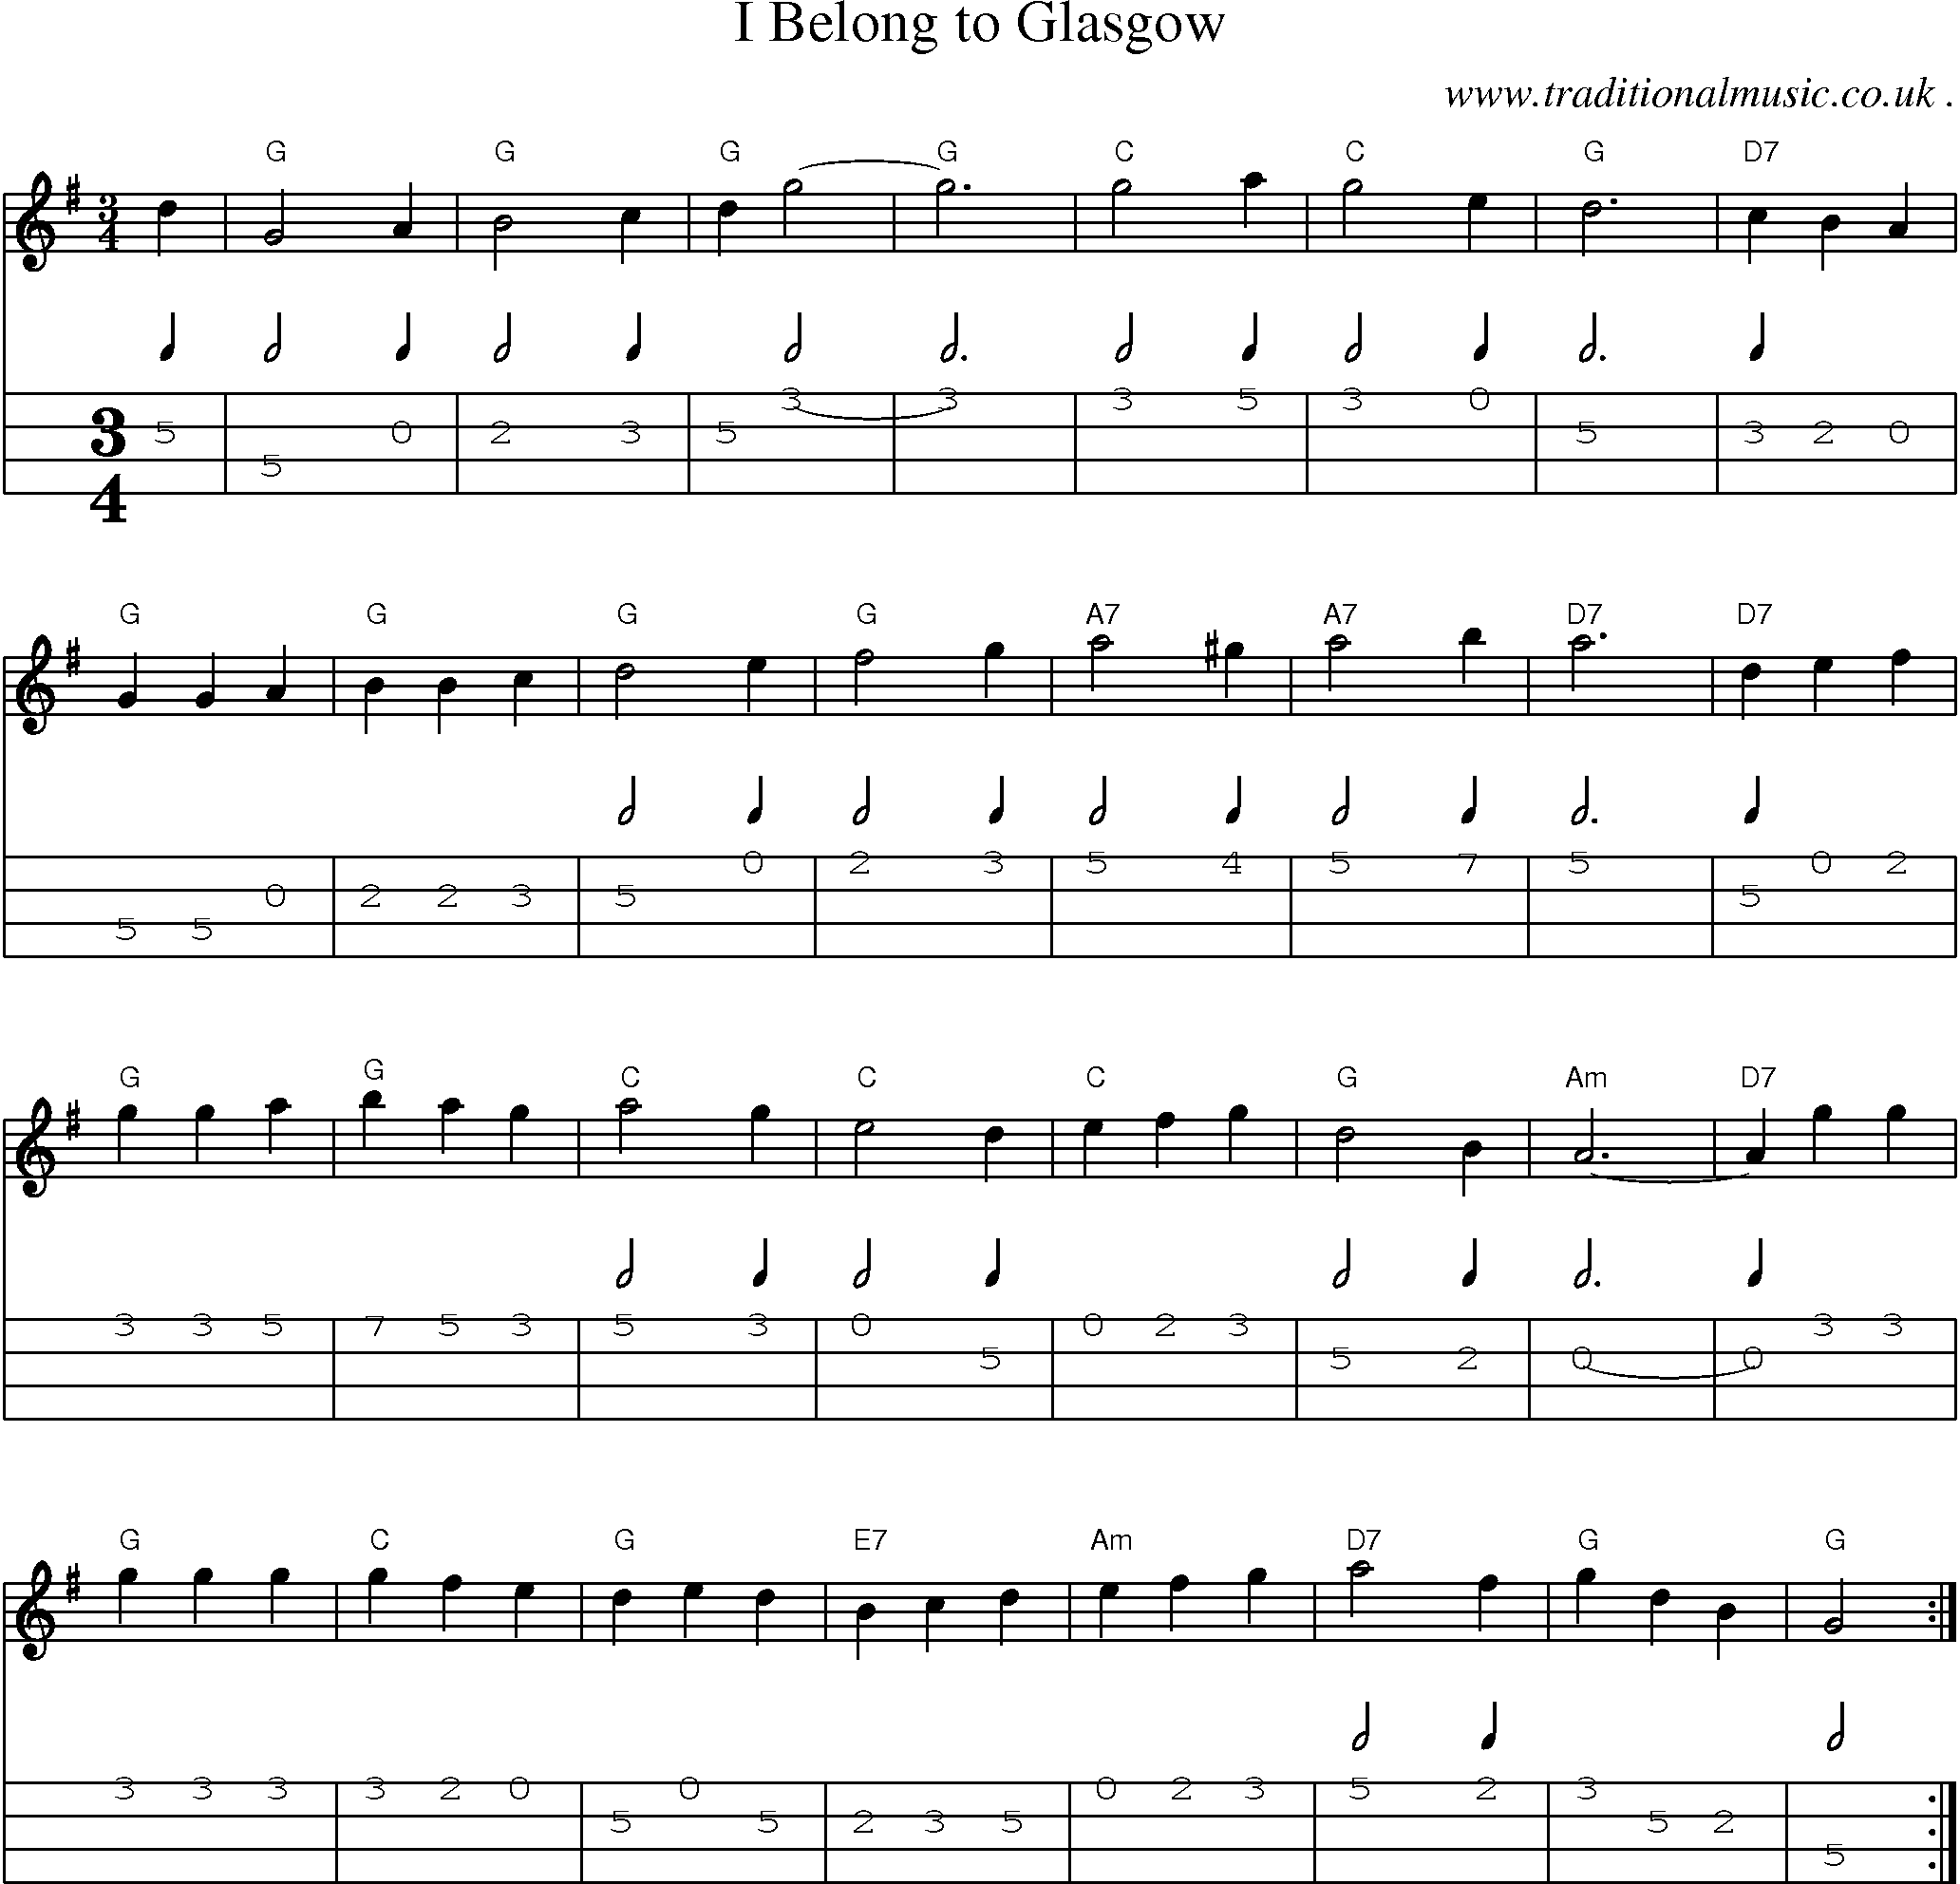 Sheet-music  score, Chords and Mandolin Tabs for I Belong To Glasgow